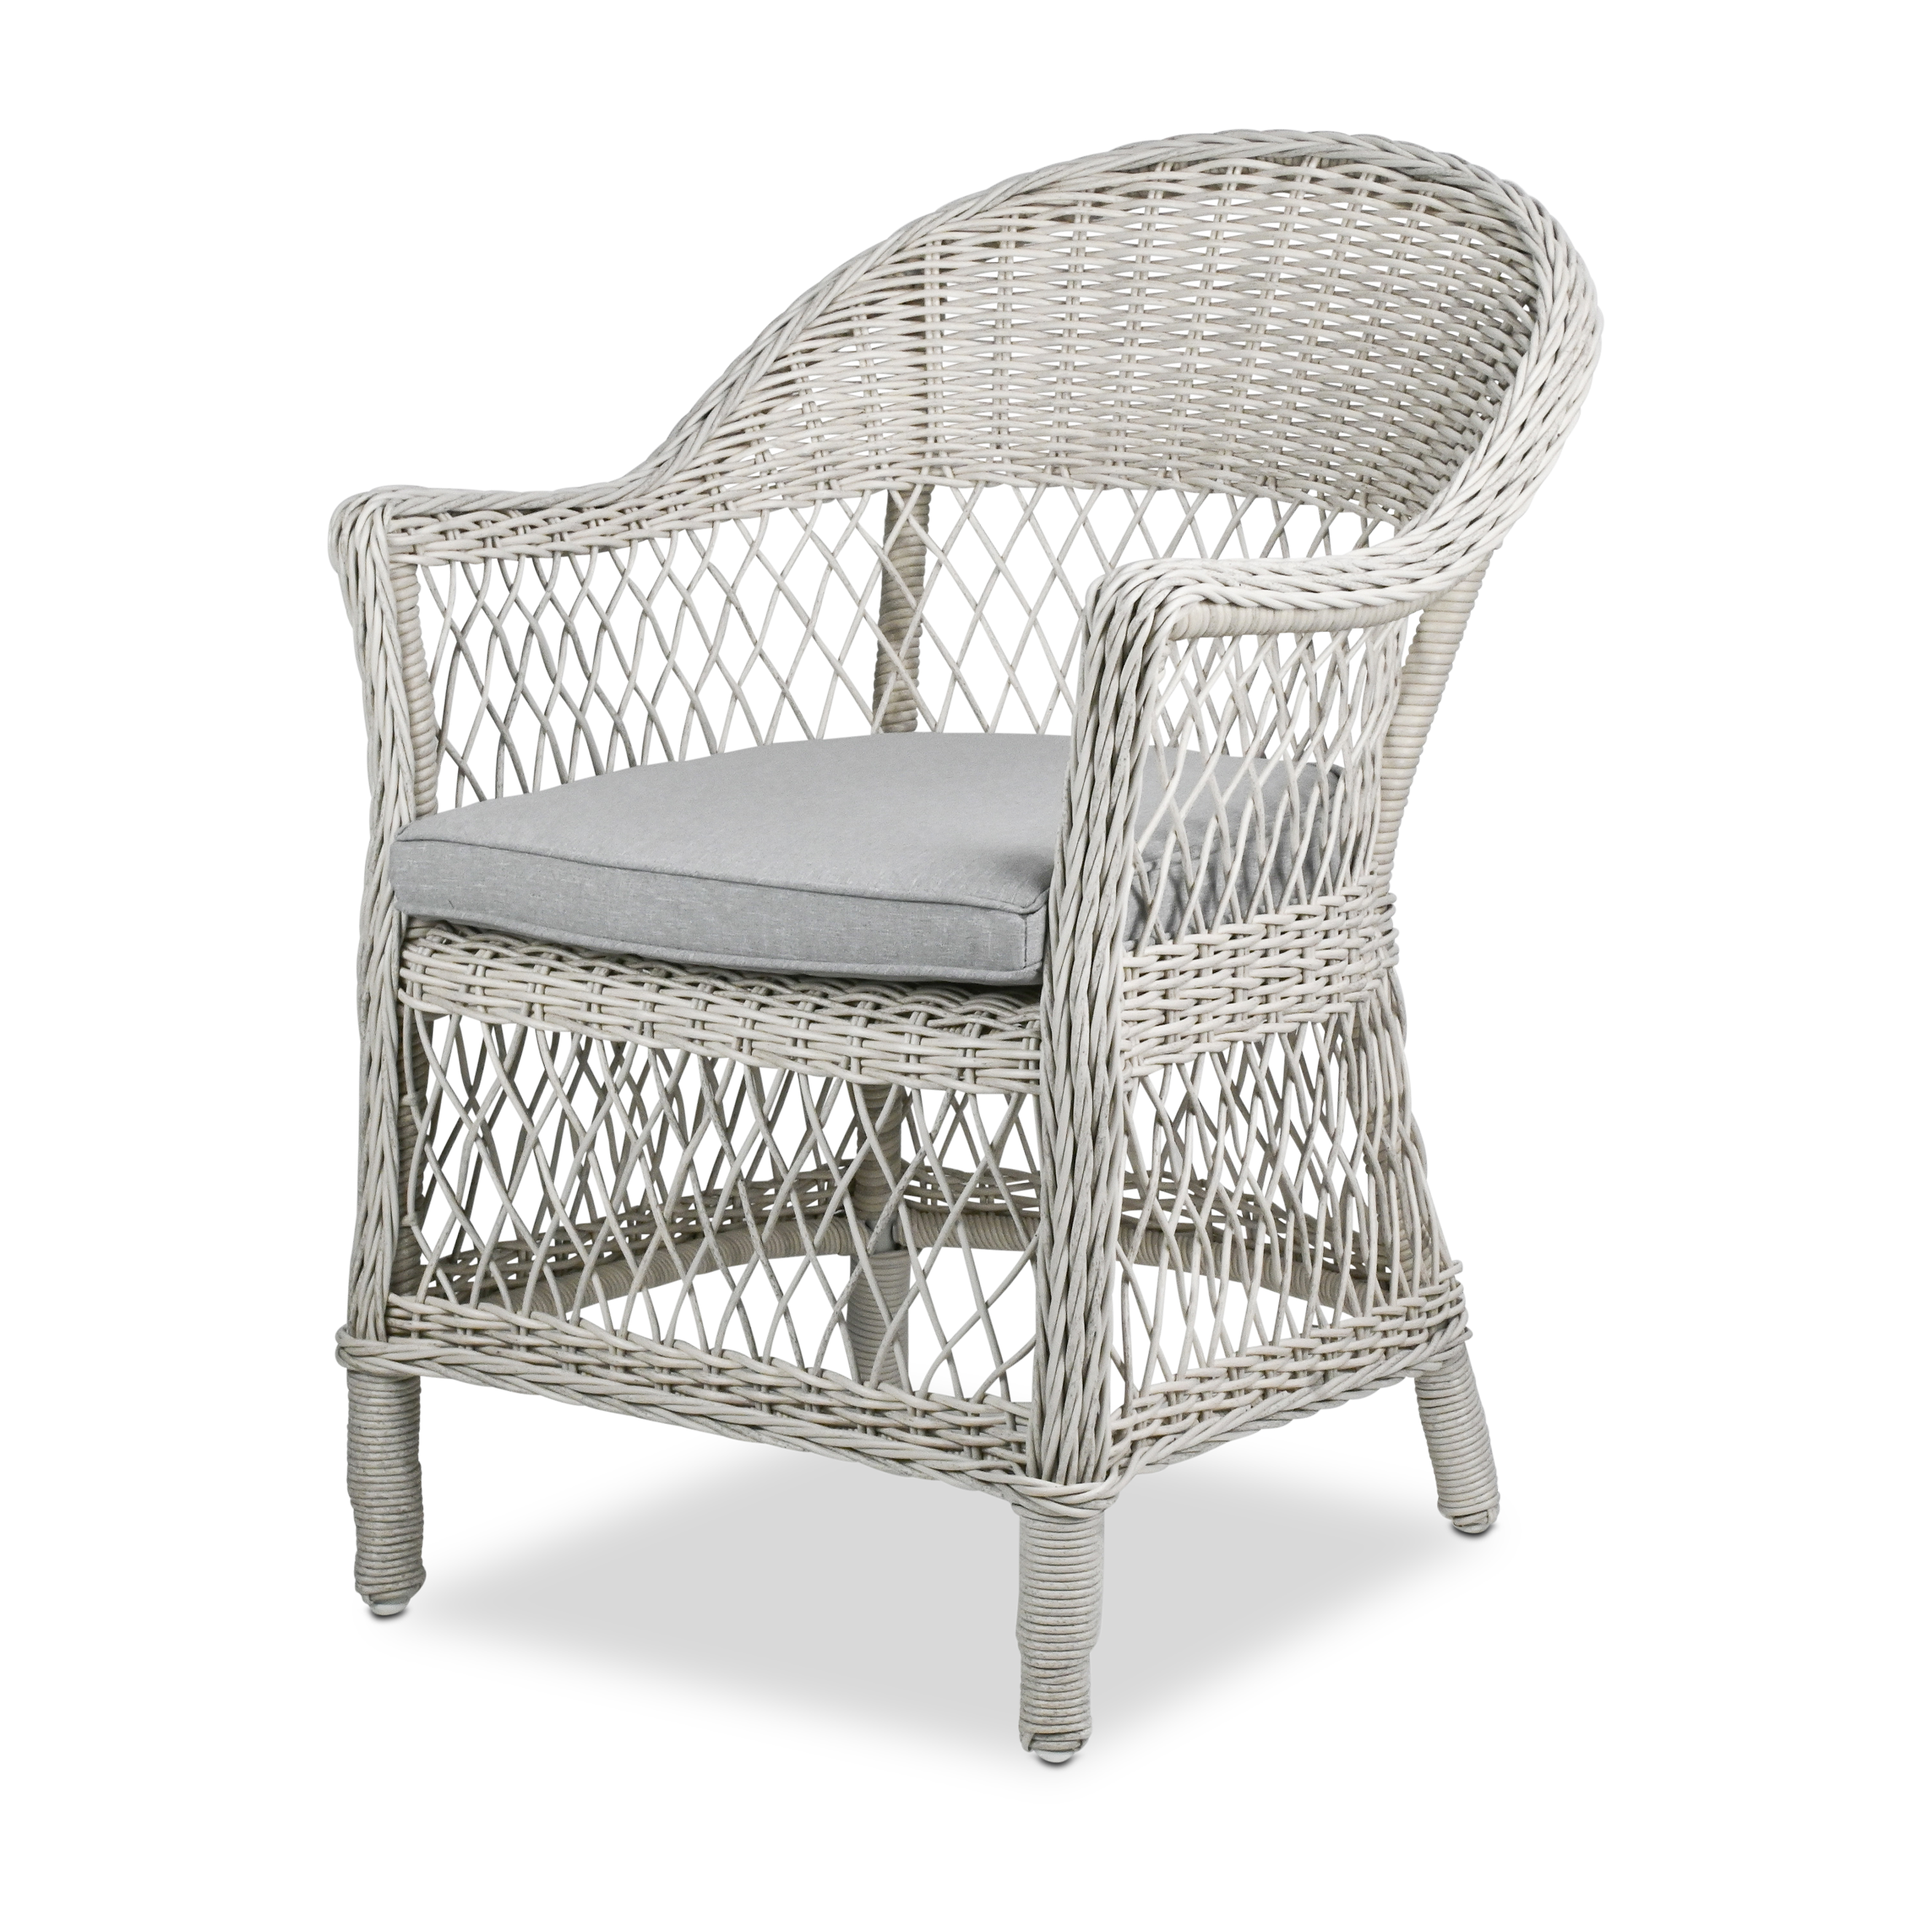 Noosa Rectangle 7 Piece Outdoor Setting in Arctic White with Wicker Chairs